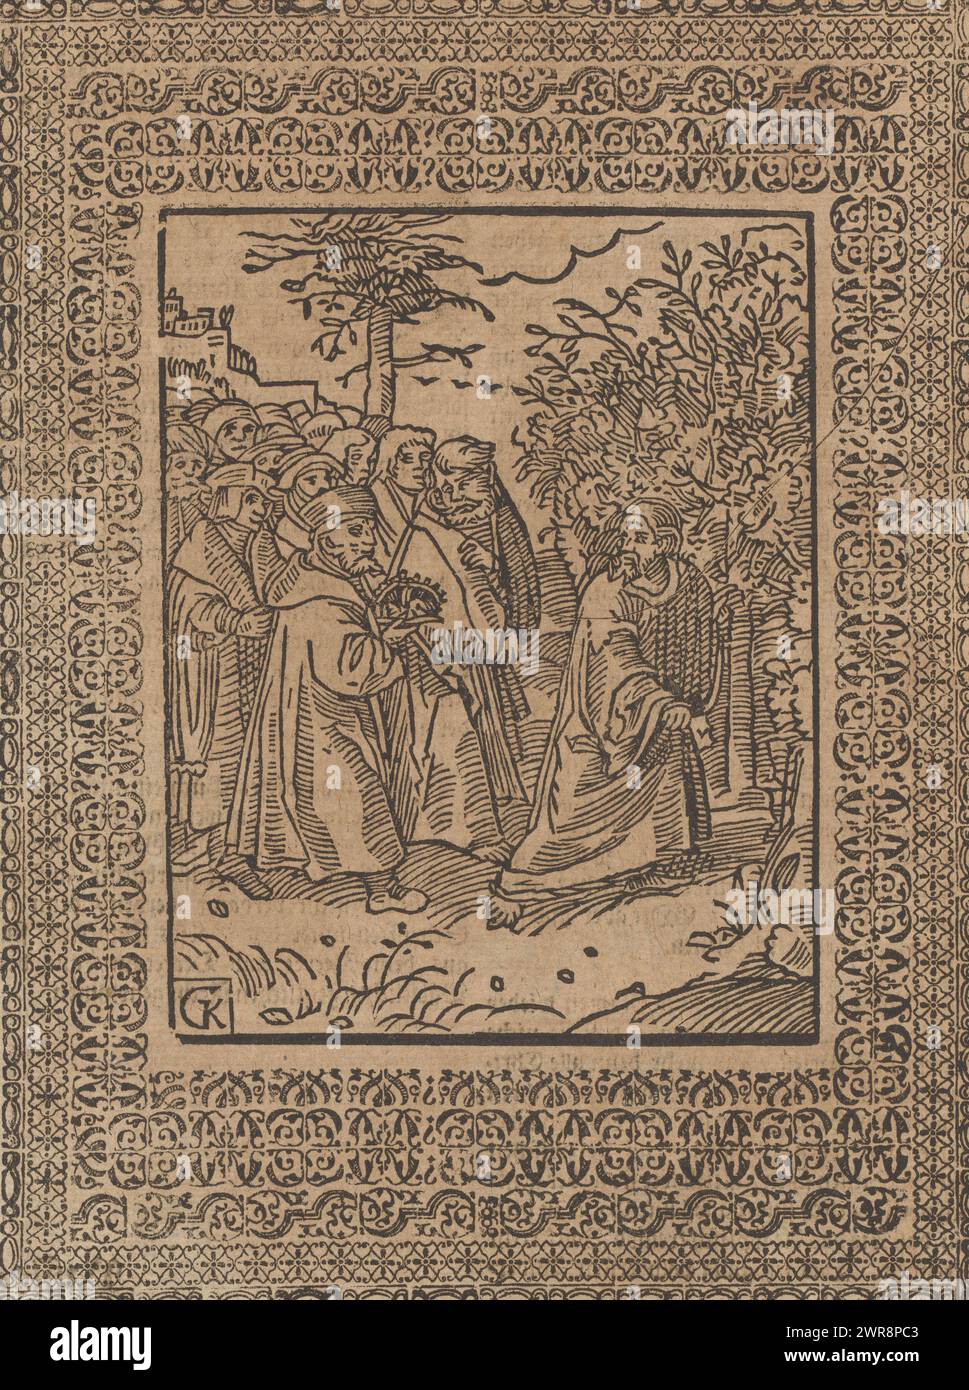 Christ flees from the Jews who want to crown him, Passional Christi und Antichristi (series title), Christ flees from the Jews who want to crown him. Contradiction about the use of power. Mirror-image copy of the print by Lucas Cranach in Martin Luther's pamphlet 'Passional Christi und Antichristi' from 1521, page 598 from a 17th century edition. In the series of 13 pairs, the example of Christ is contrasted with the behavior of the Pope in two representations., print maker: Monogrammist GK (prentmaker, 17e eeuw), after print by: Lucas Cranach (I), Europe, c. 1661, paper Stock Photo